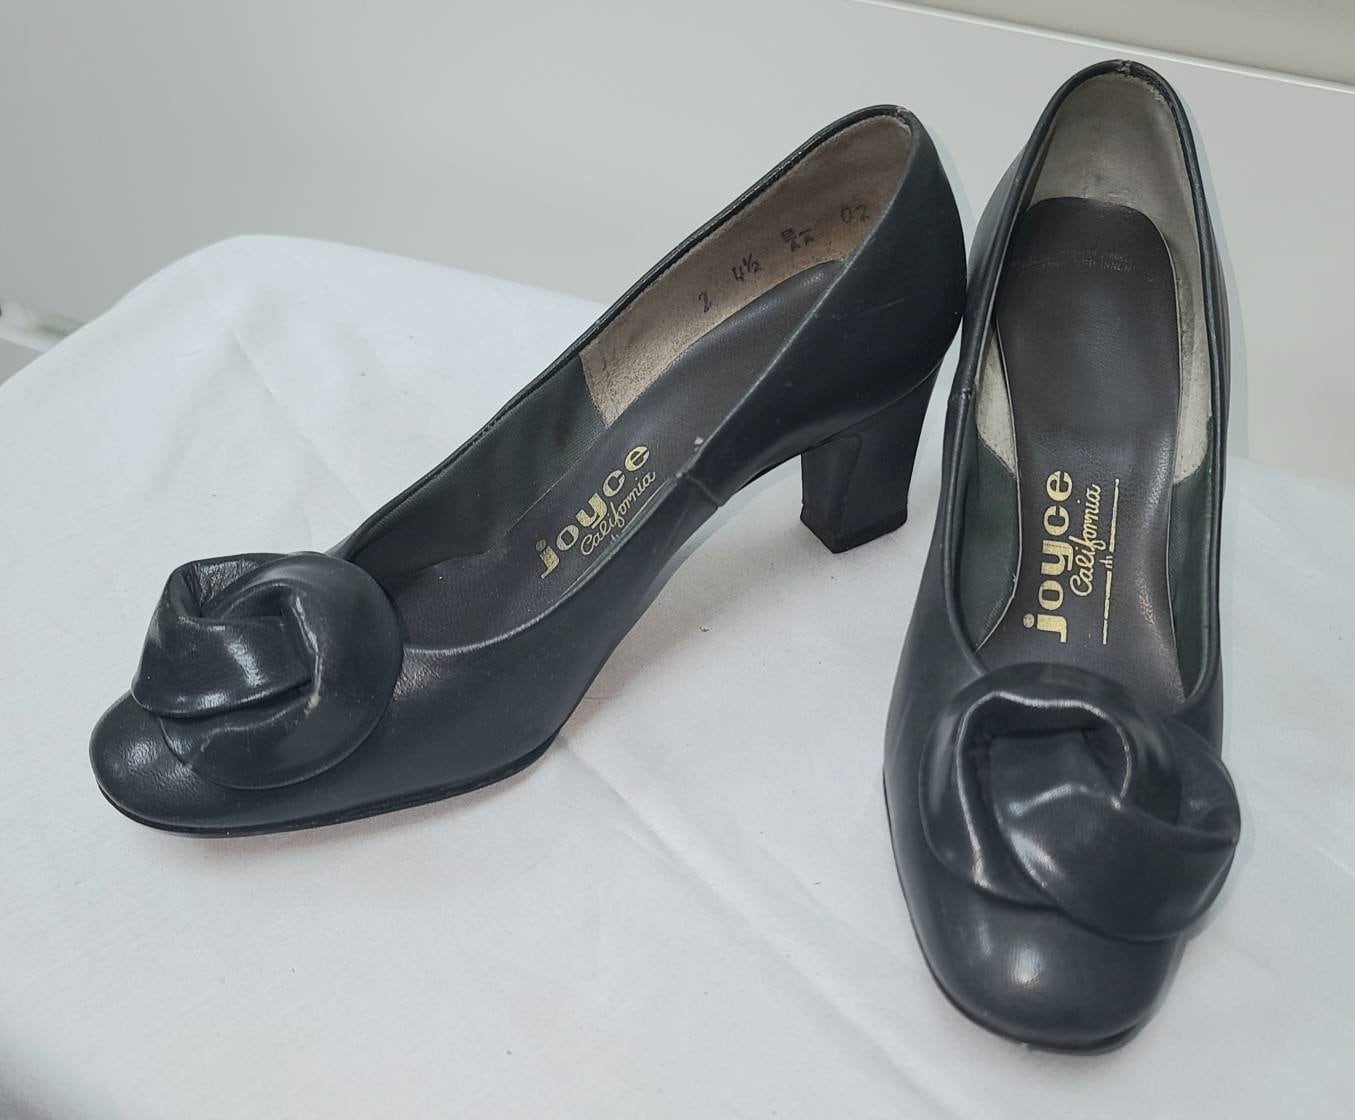 Vintage 1940s 50s Shoes Dark Gray Leather Pumps Large Knot Ornaments Joyce of California Mid Century Rockabilly sz 4.5